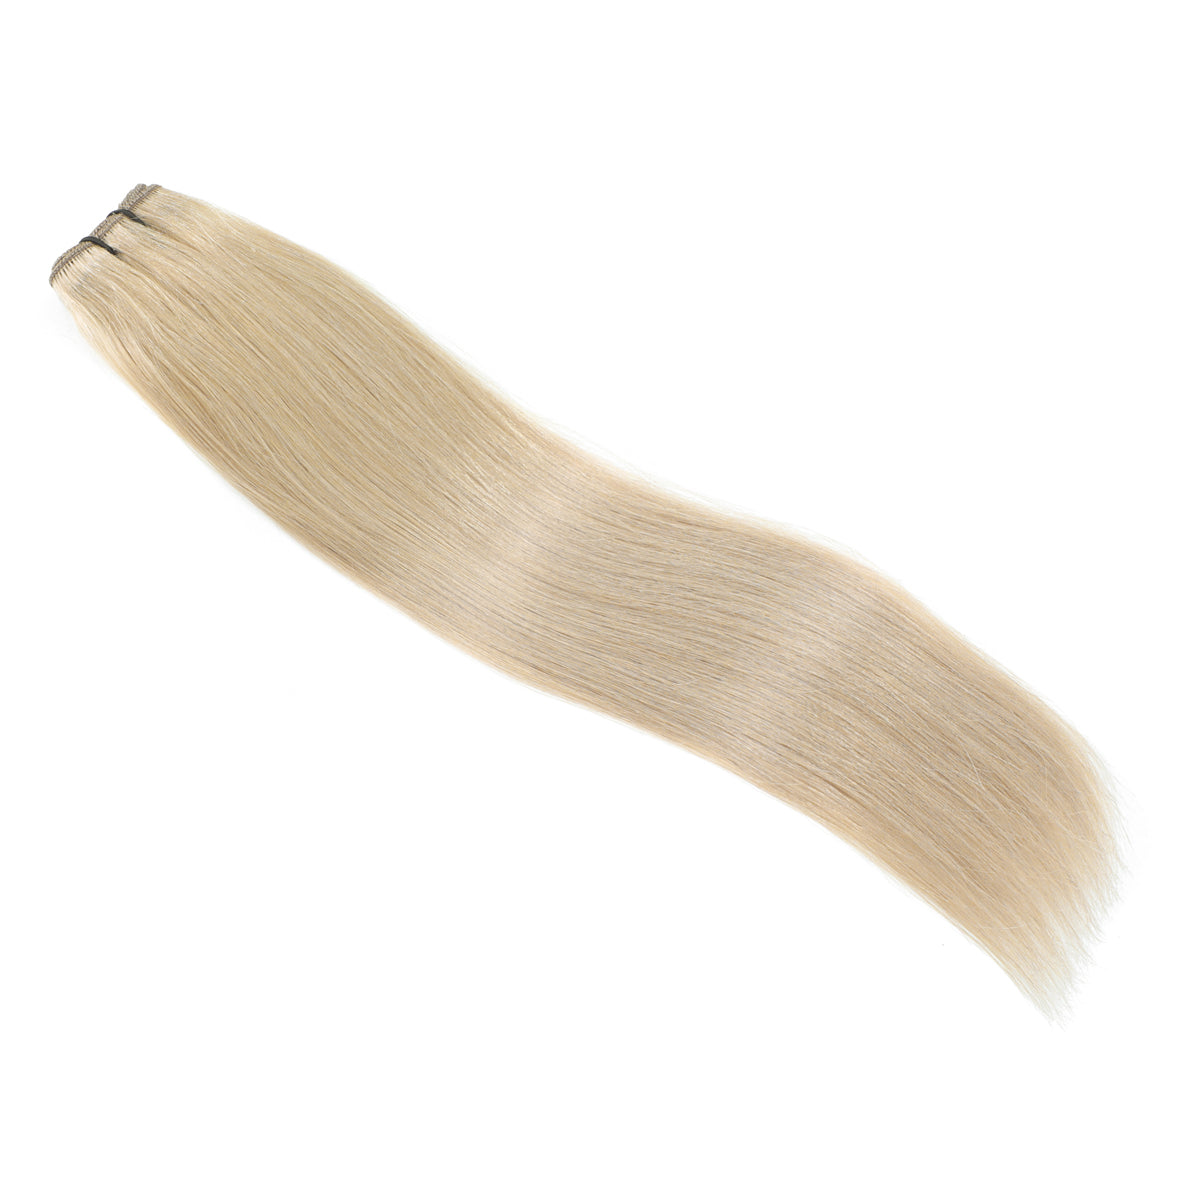 Remy Human Hair Extensions for Volume and Length